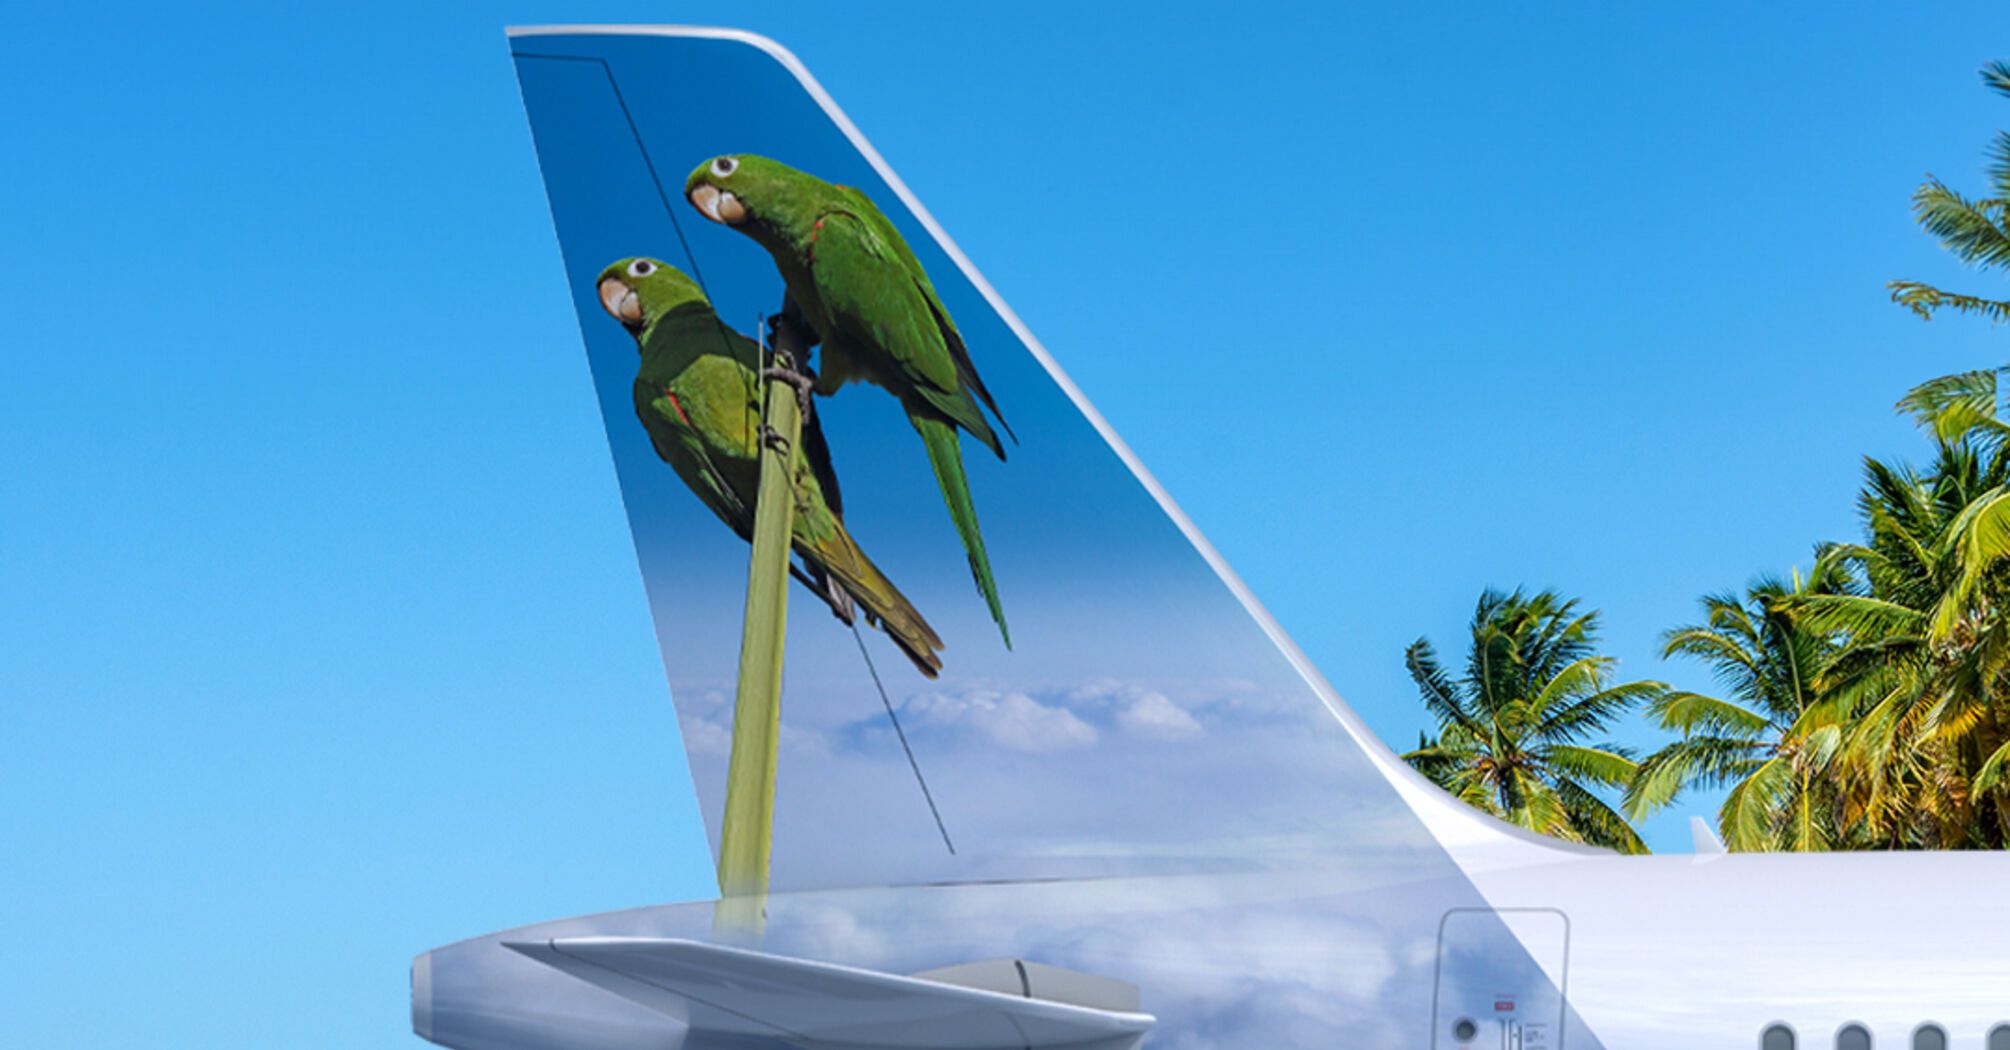 Frontier Airlines has expanded its fleet with new Airbus A321neo featuring parrots on the tail: what they signify